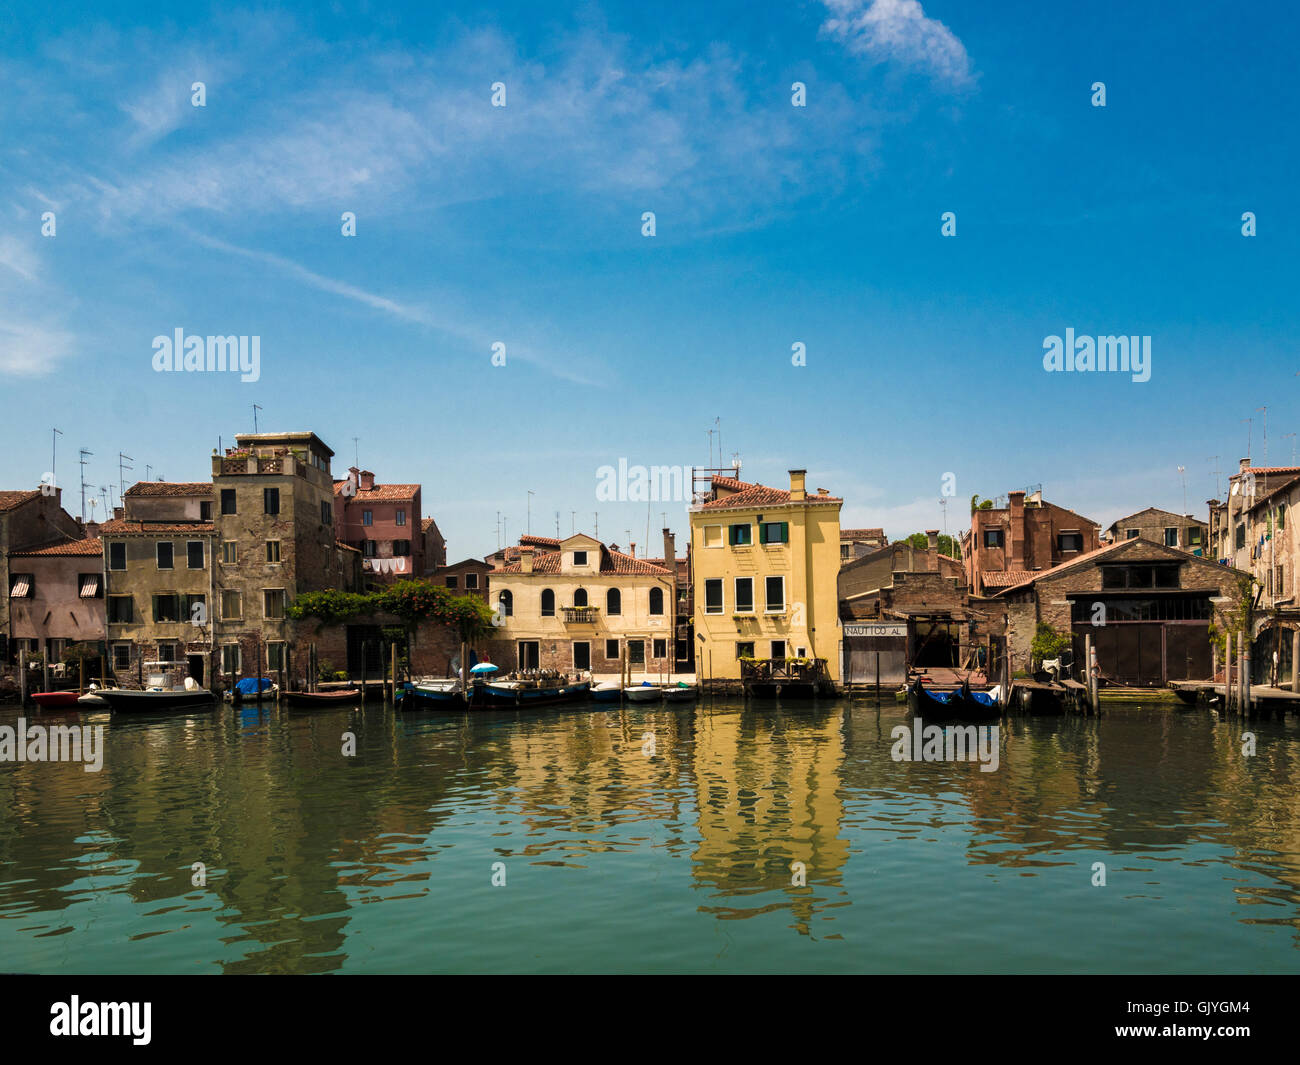 Traditional  buildings, with moored boats and gondolas along the  Canale di San Pietro, Venice. Italy. Stock Photo